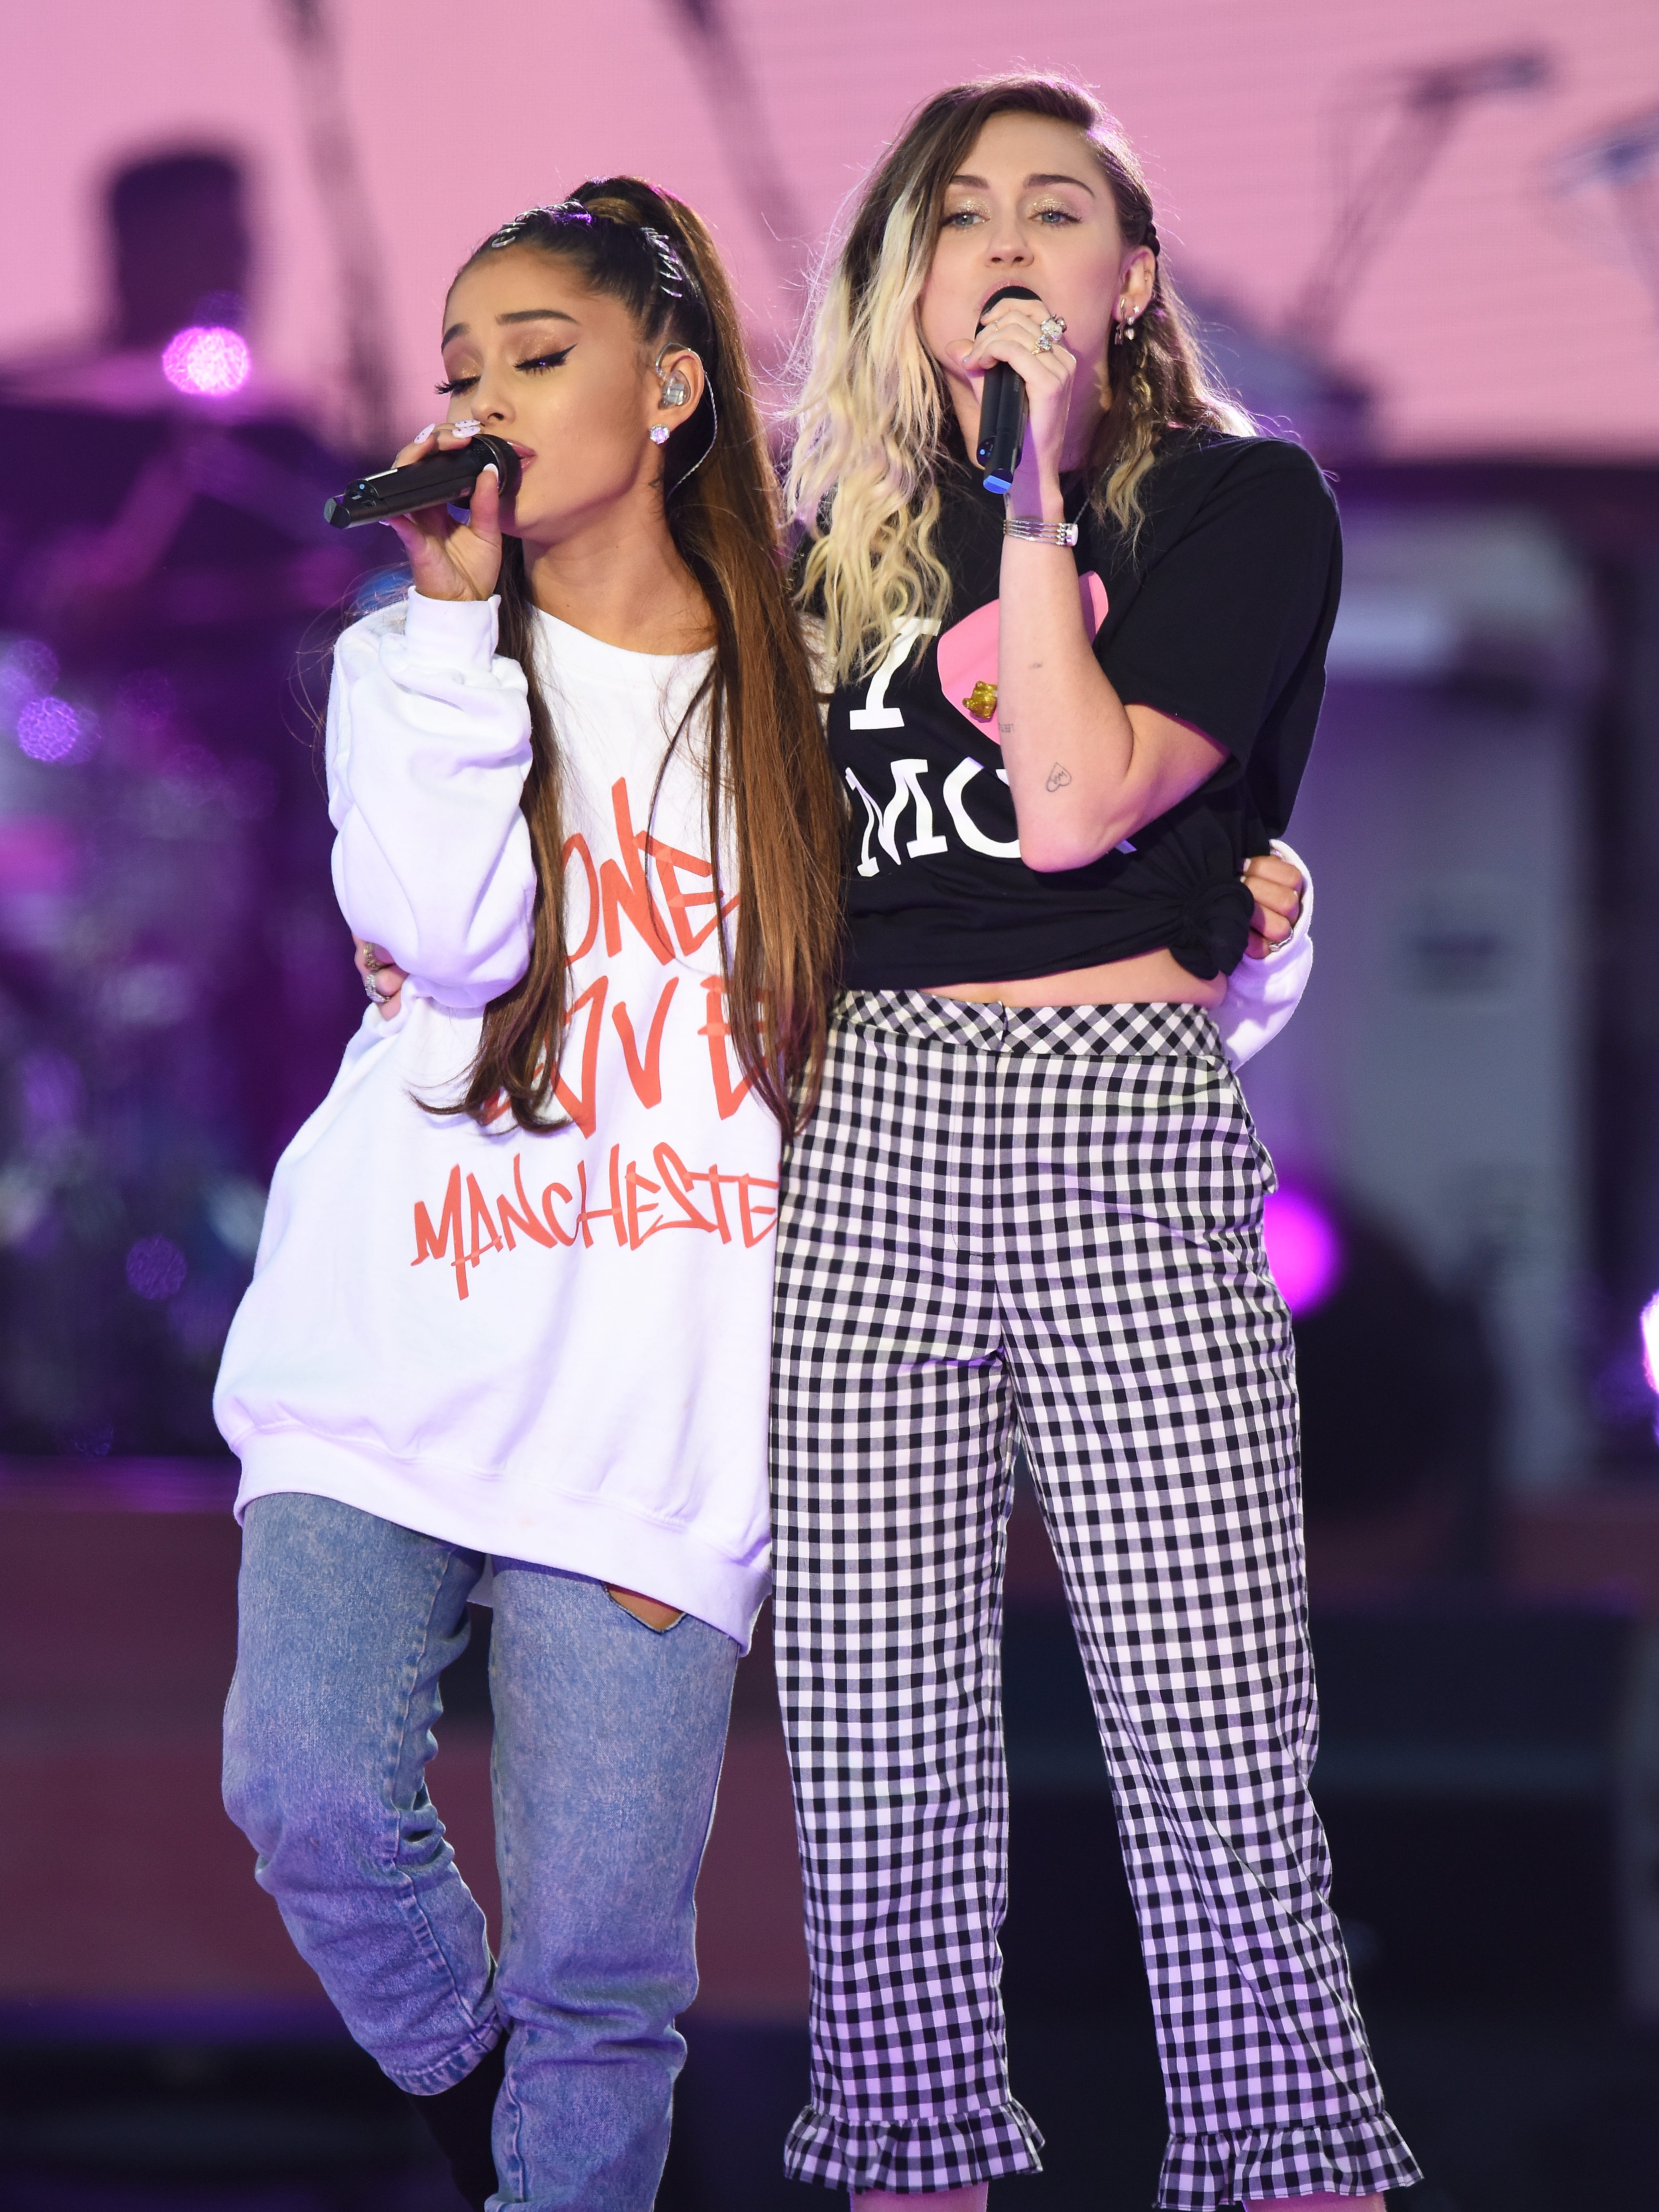 Undaunted Ariana Grande Leads Emotional One Love Show For